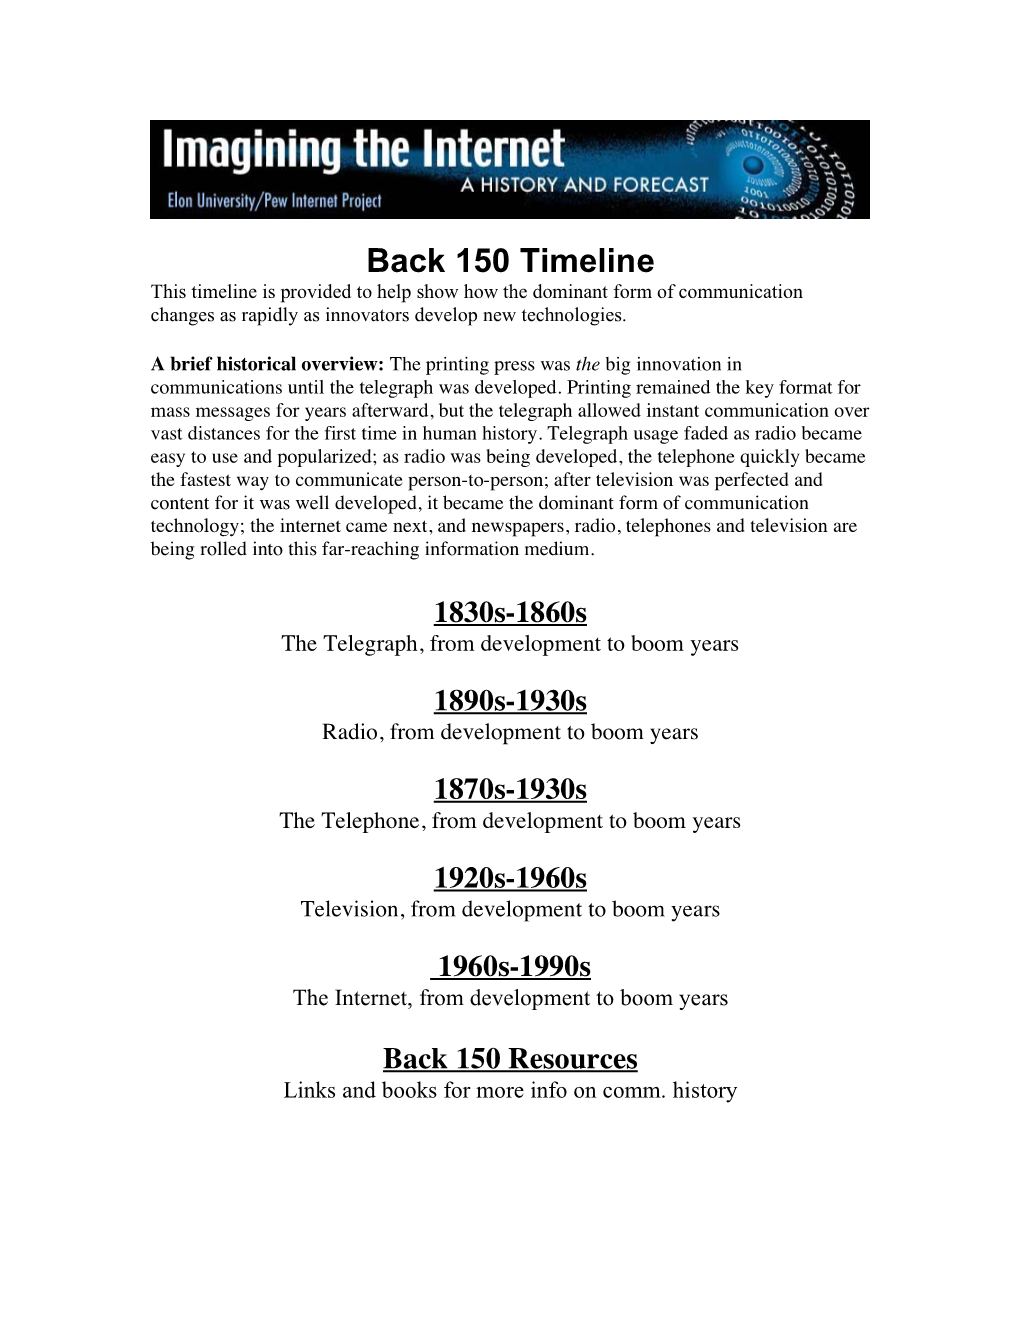 Back 150 Timeline This Timeline Is Provided to Help Show How the Dominant Form of Communication Changes As Rapidly As Innovators Develop New Technologies